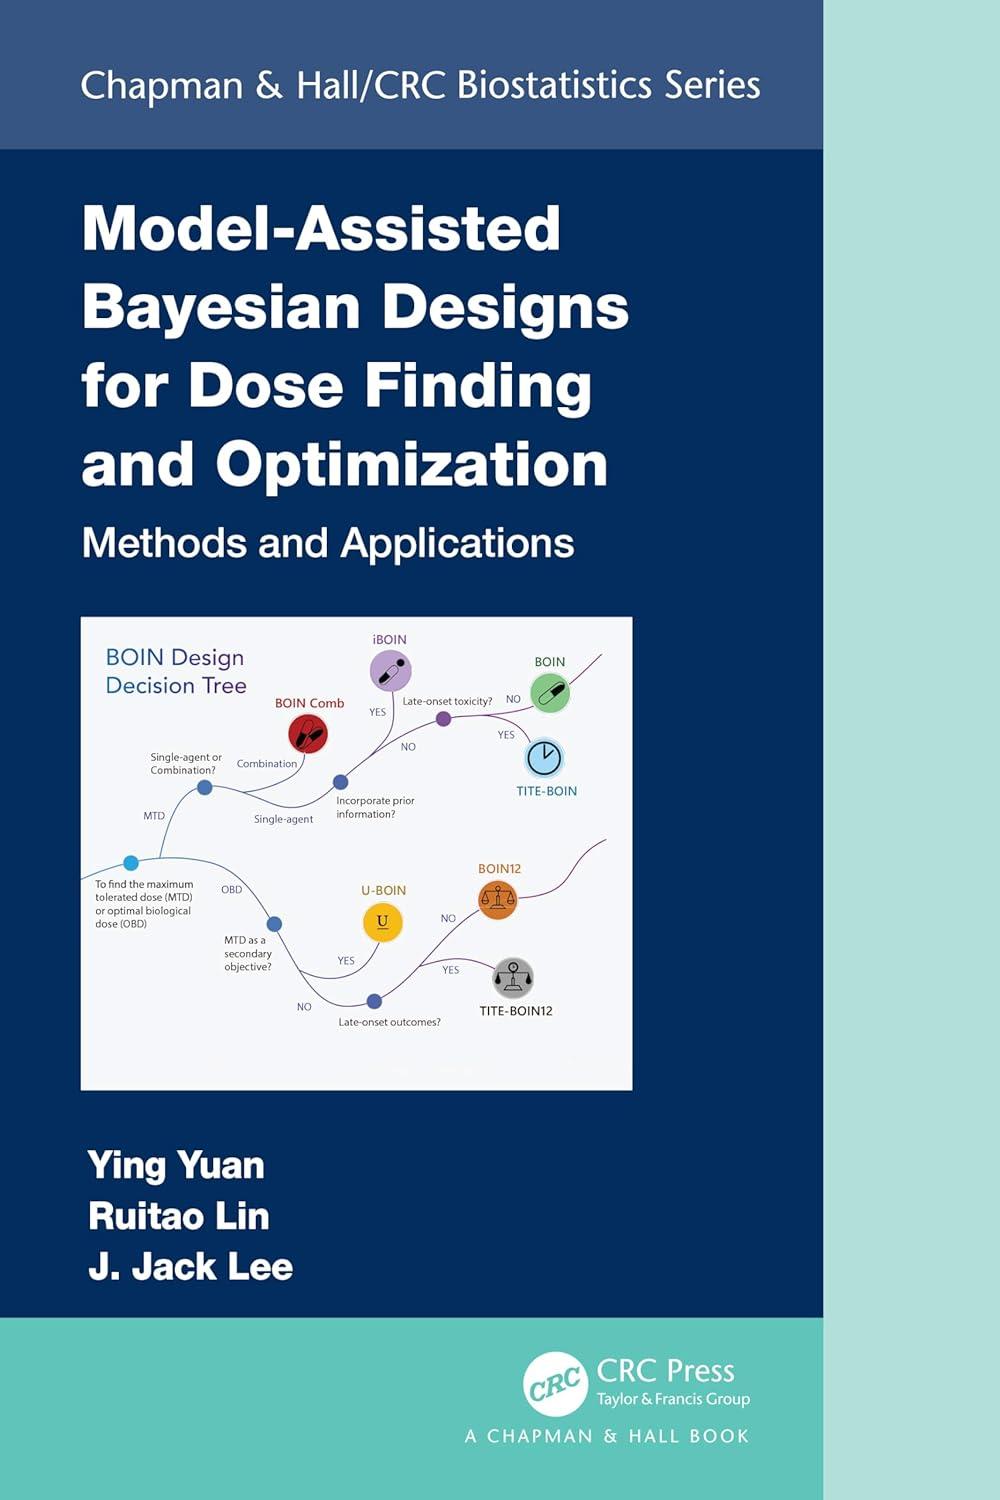 model-assisted bayesian designs for dose finding and optimization 1st edition ying yuan, ruitao lin, j. jack